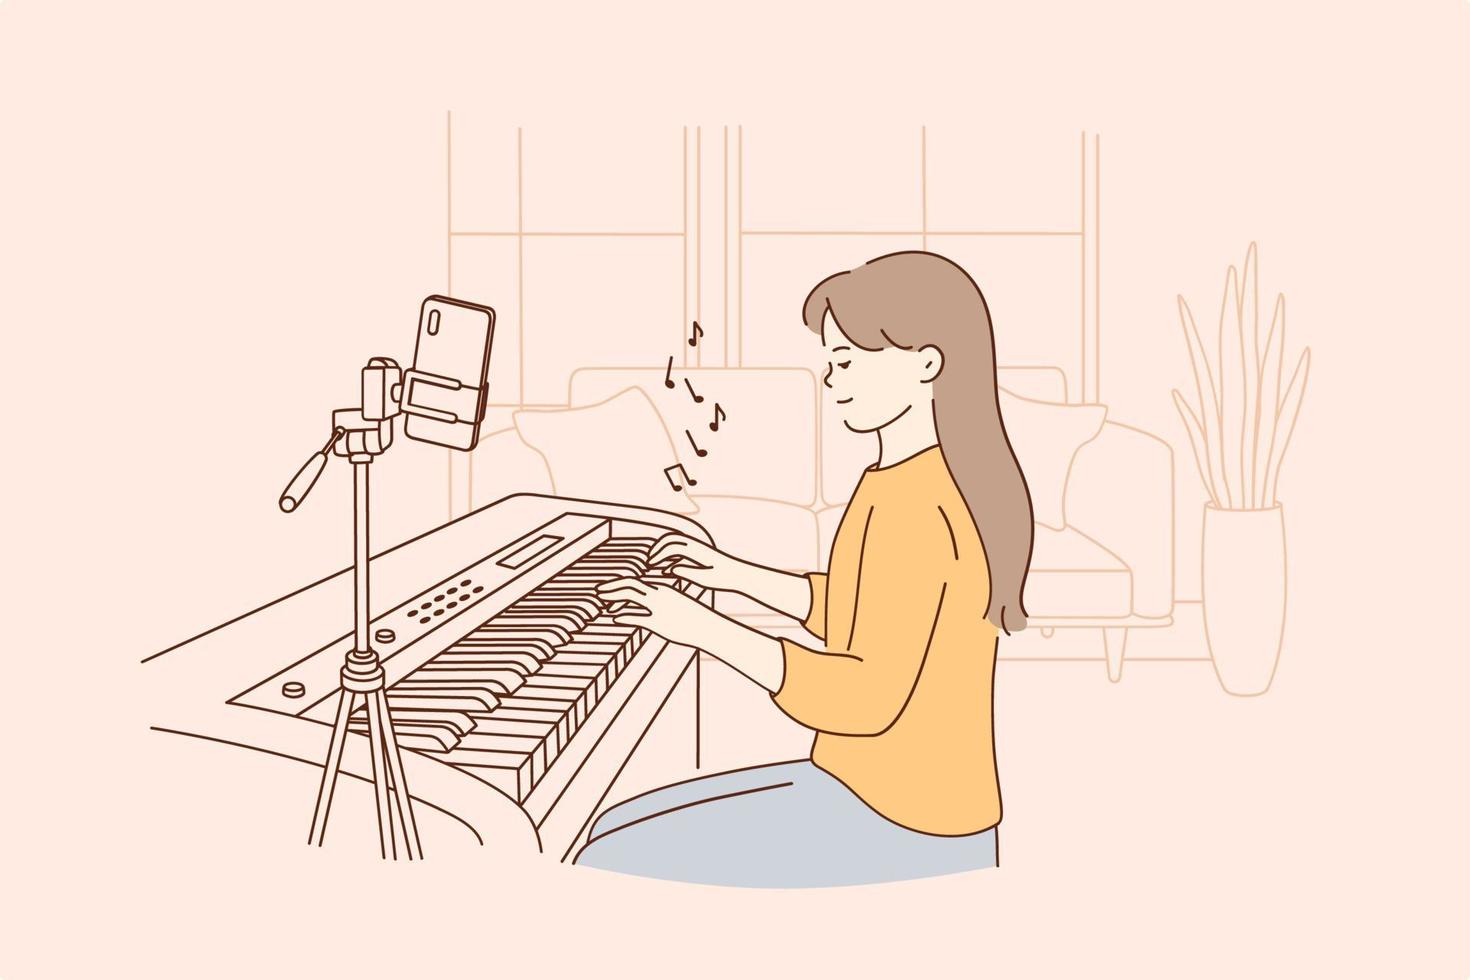 Remote distant music lesson concept. Small positive girl child sitting playing digital piano and recording video on phone during online learning and video chat from home vector illustration